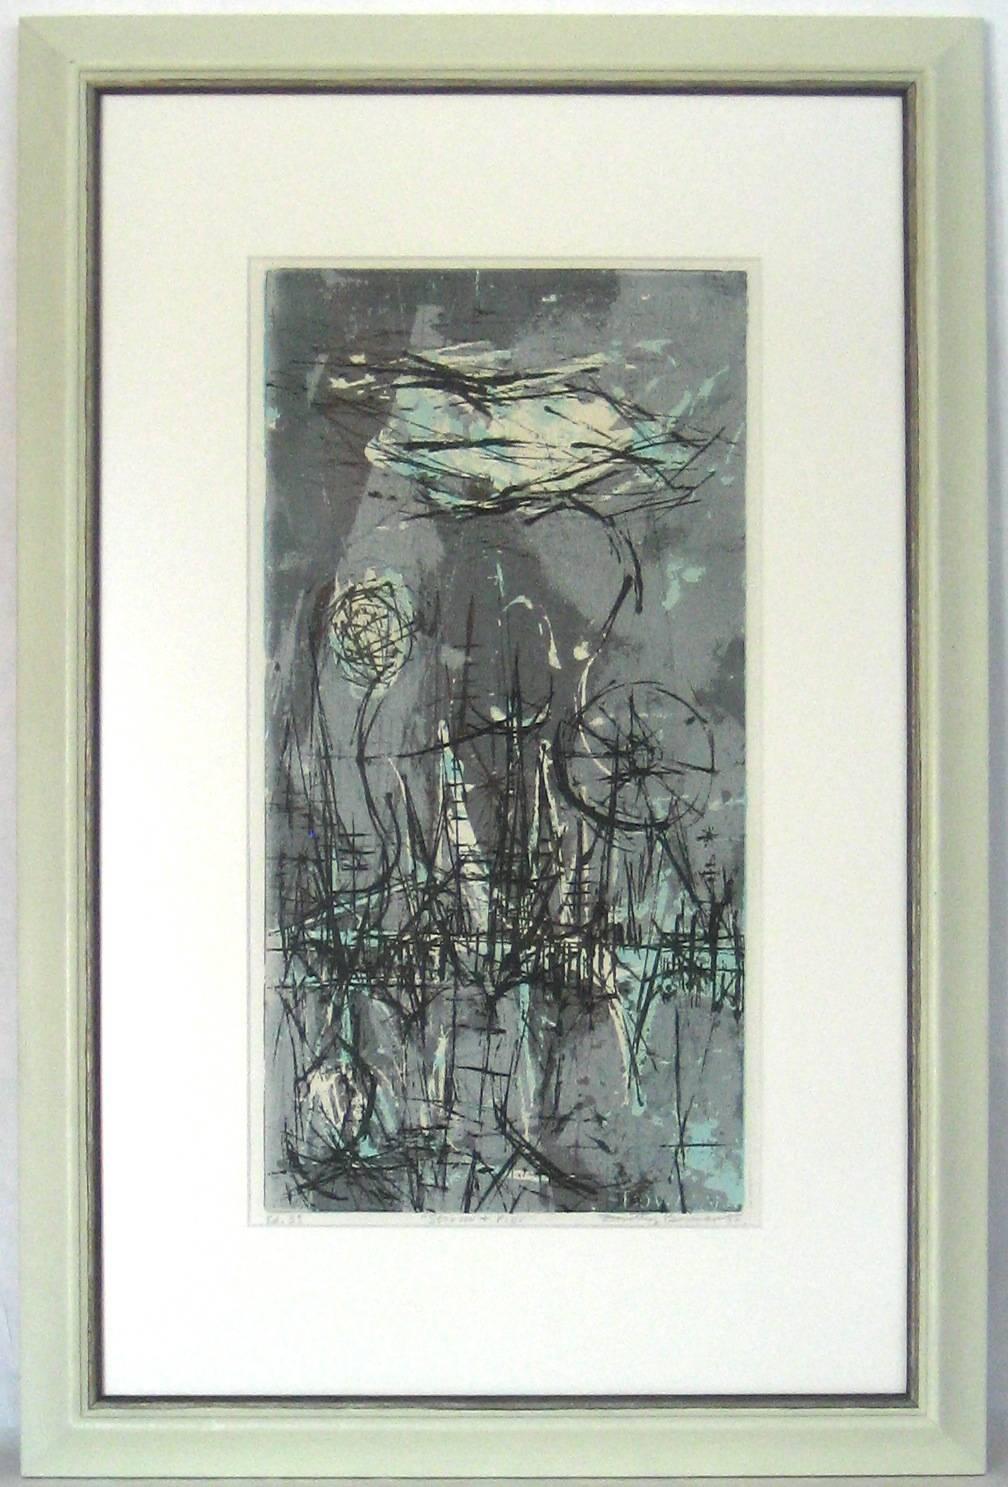 Dorothy Bowman Abstract Print - "Storm & Pier" Modernist Abstract